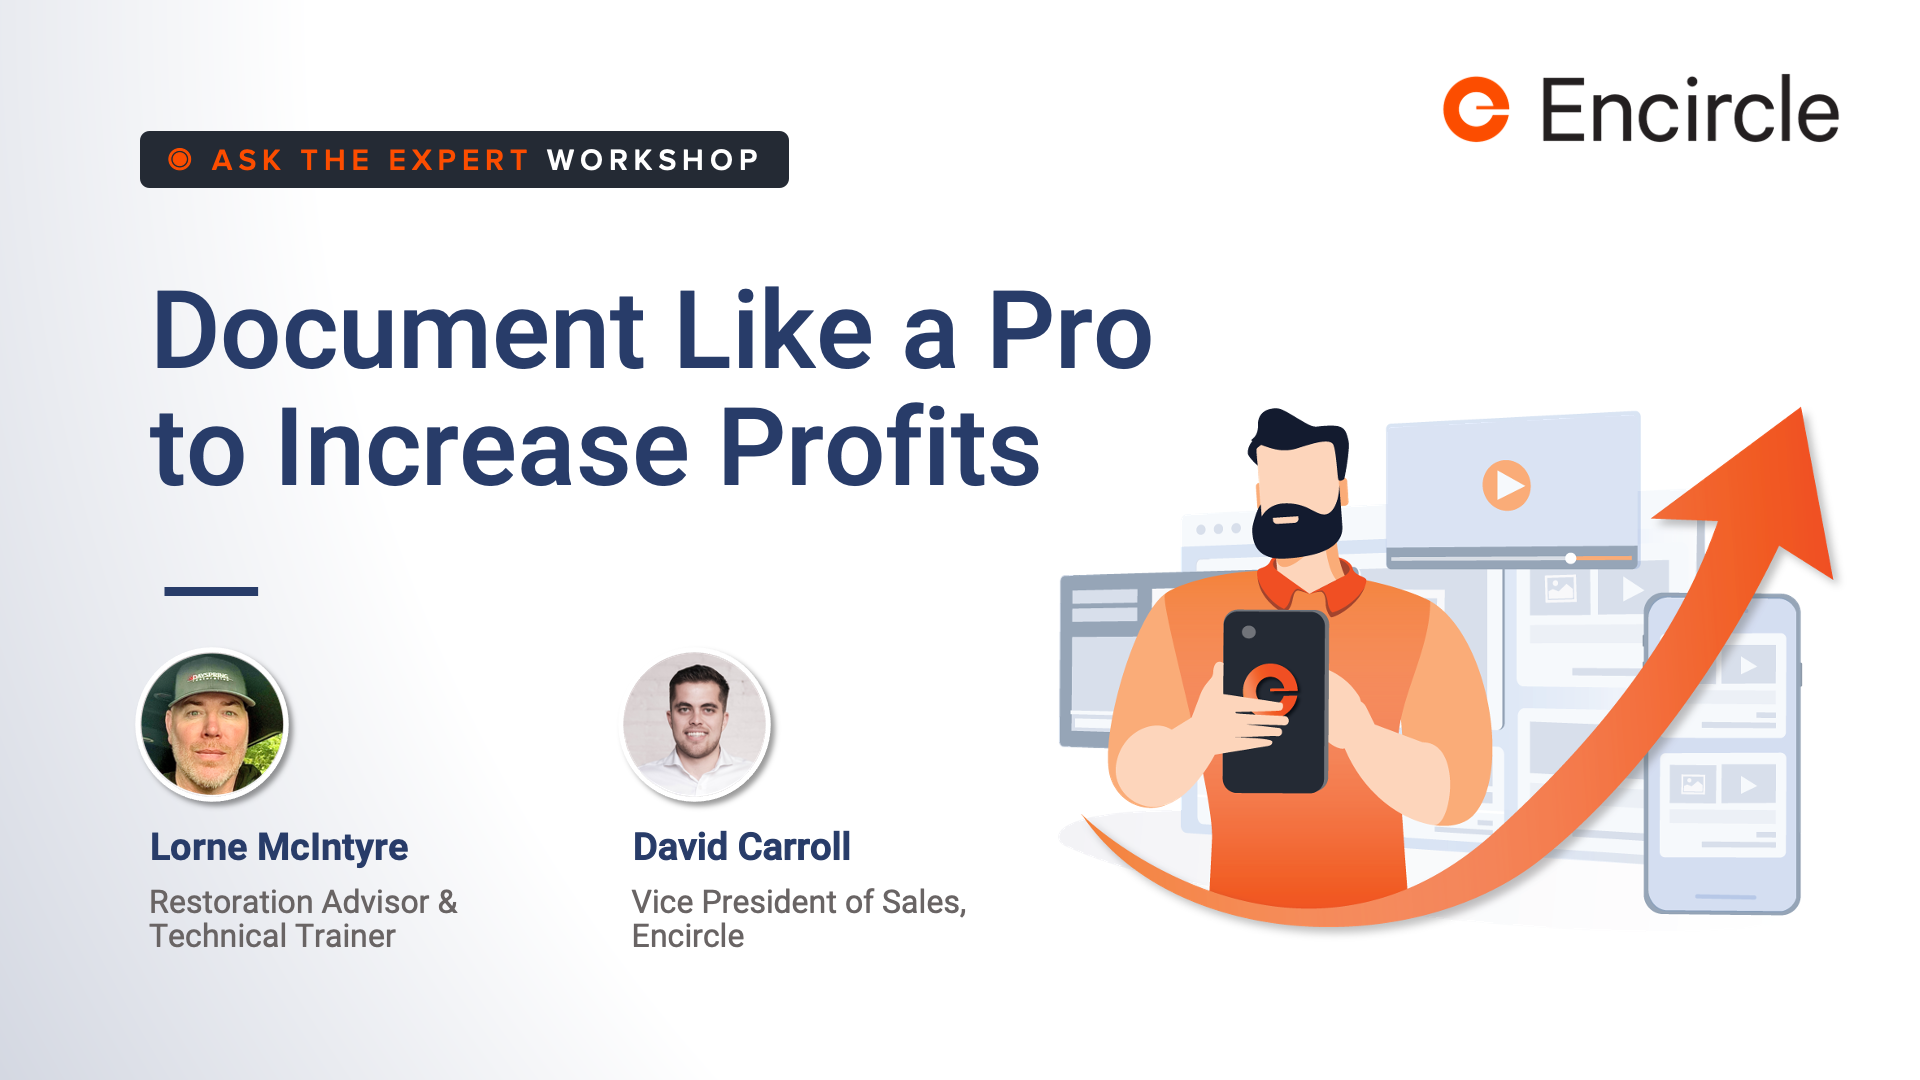 Ask the expert workshop: Document like a pro to increase profits